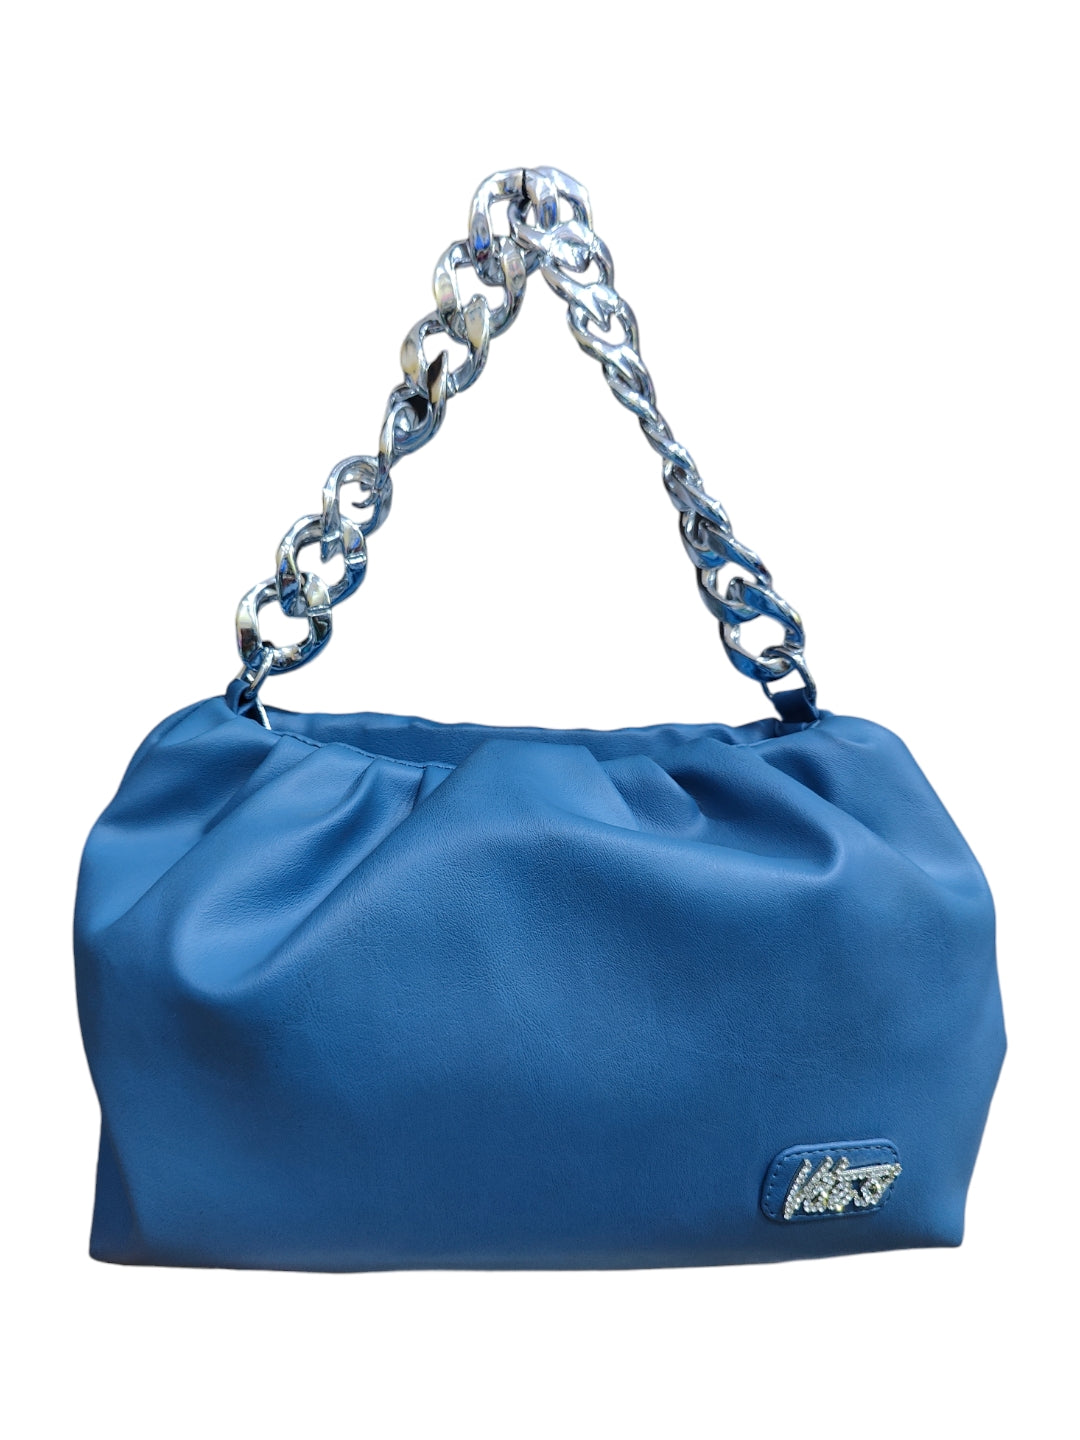 A blue sling bag with Vdesi brand's logo on it. 